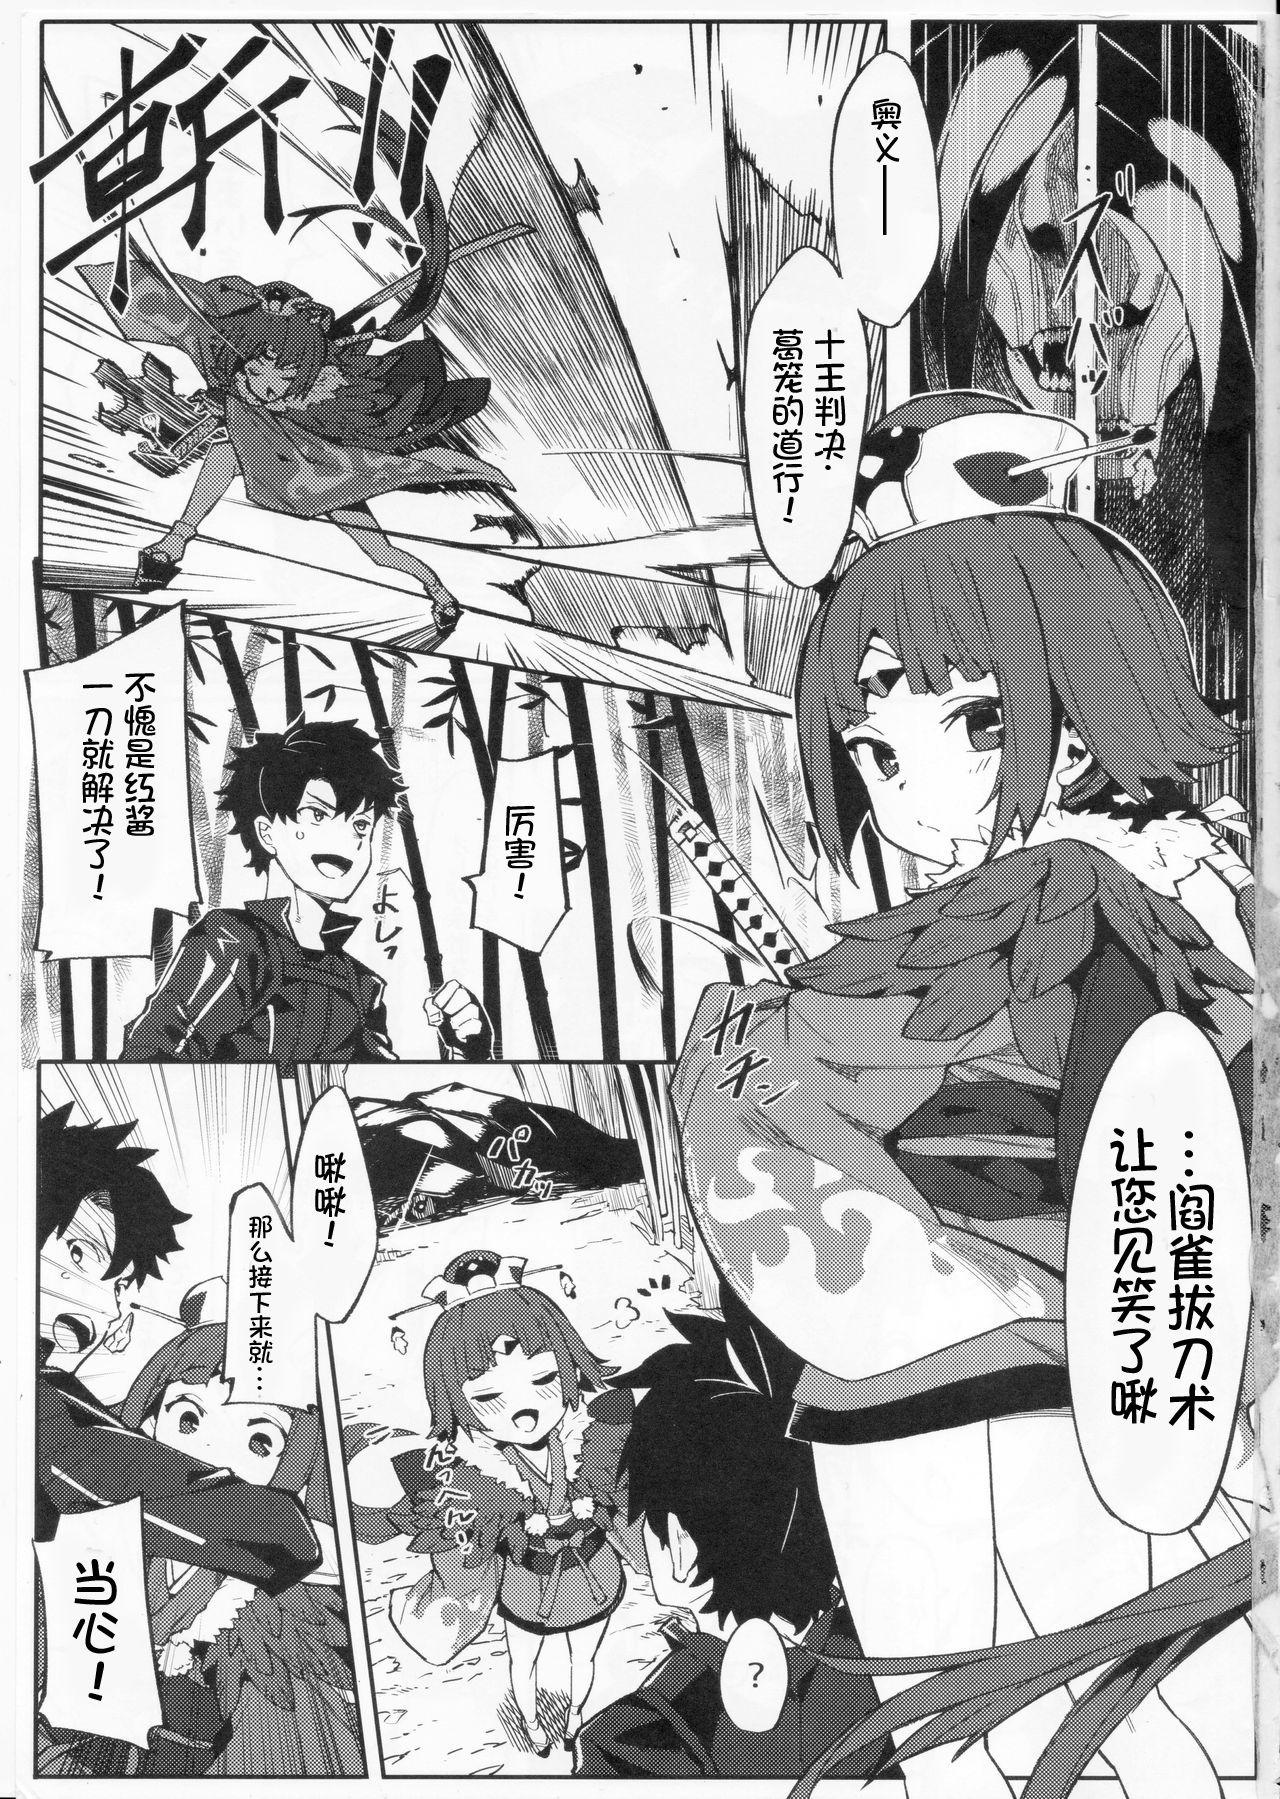 Best Blowjob Enmatei Ryouyou-ki - Fate grand order Perfect - Page 3